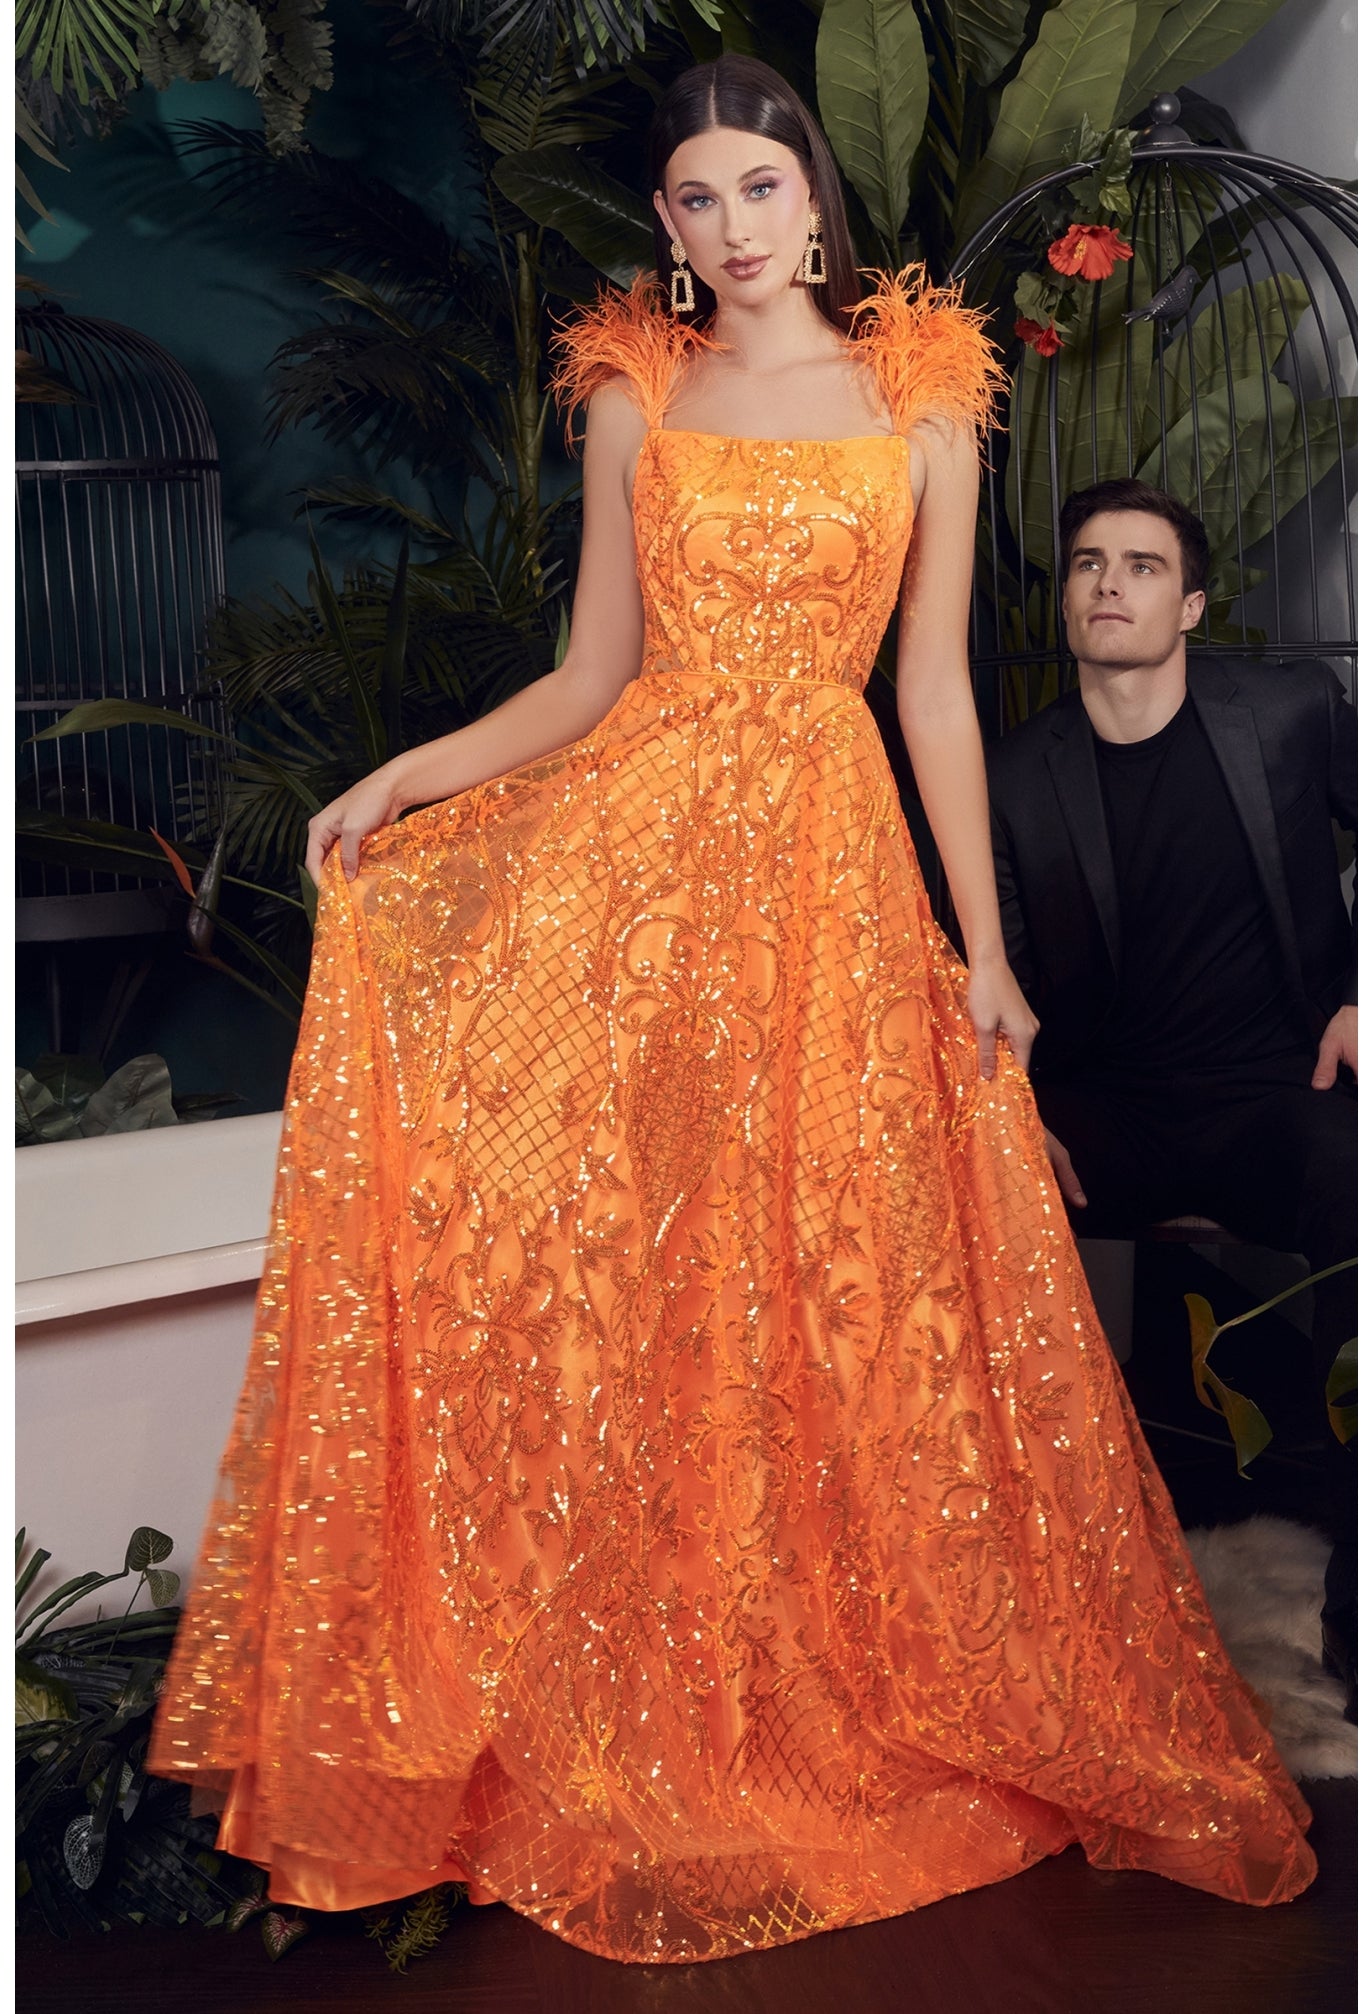 Ladivine KV1076 Neon Orange Sequin Feather Prom Dress A Line Sheer Backless Formal Gown Make a bold, statement in this stunning neon orange ball gown! Not for the faint of heart, this gown is sure to draw attention at any formal event. The faux feather straps scream glamour while providing ample support, while the shimmery sequin scroll and lattice design will glisten underneath any lights. 